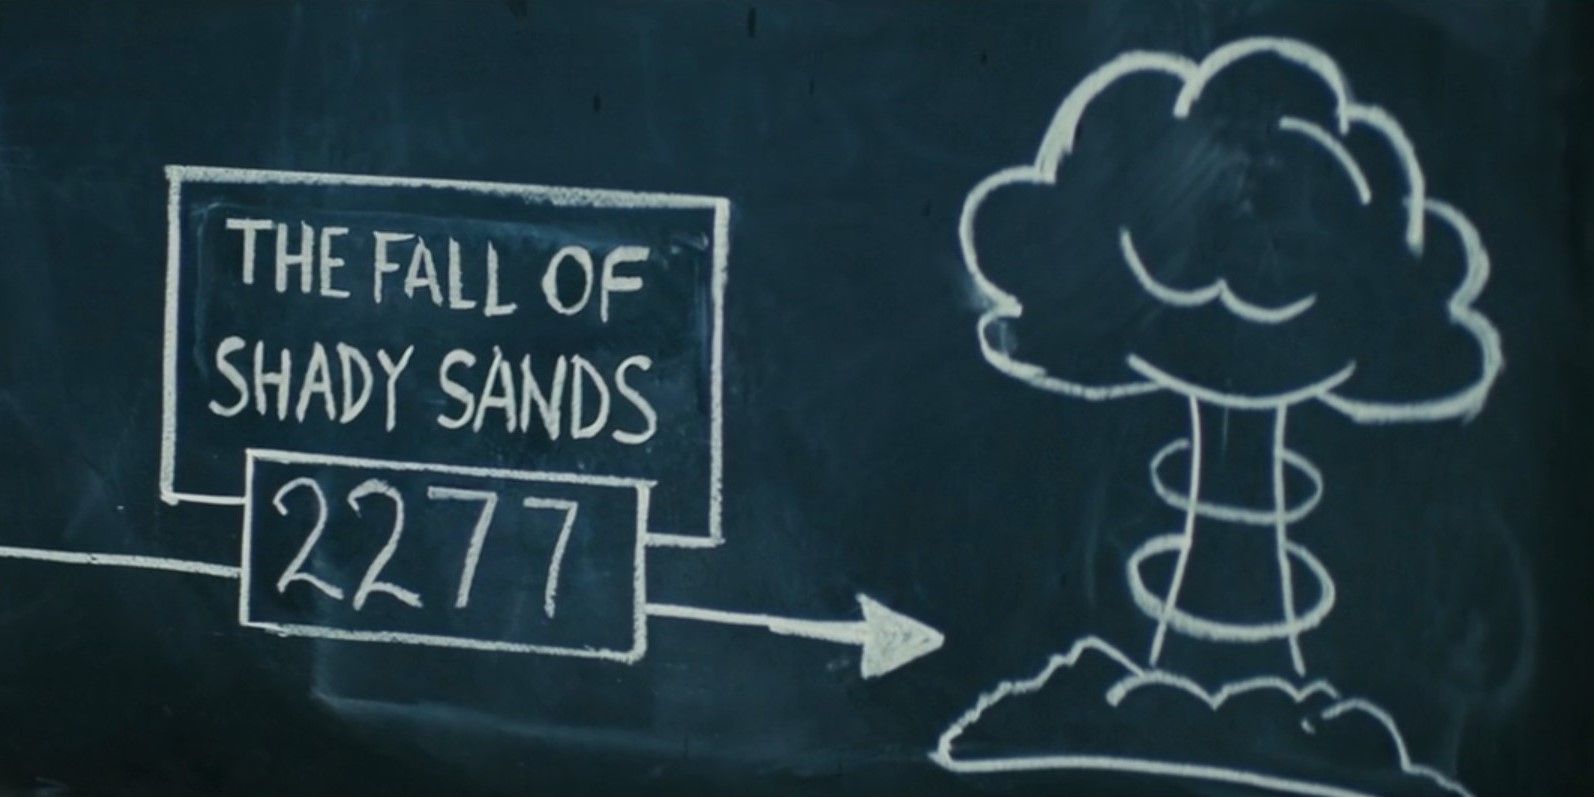 Chalkboard reading "the fall of shady sands 2277" next to a picture of a mushroom cloud in the Fallout show